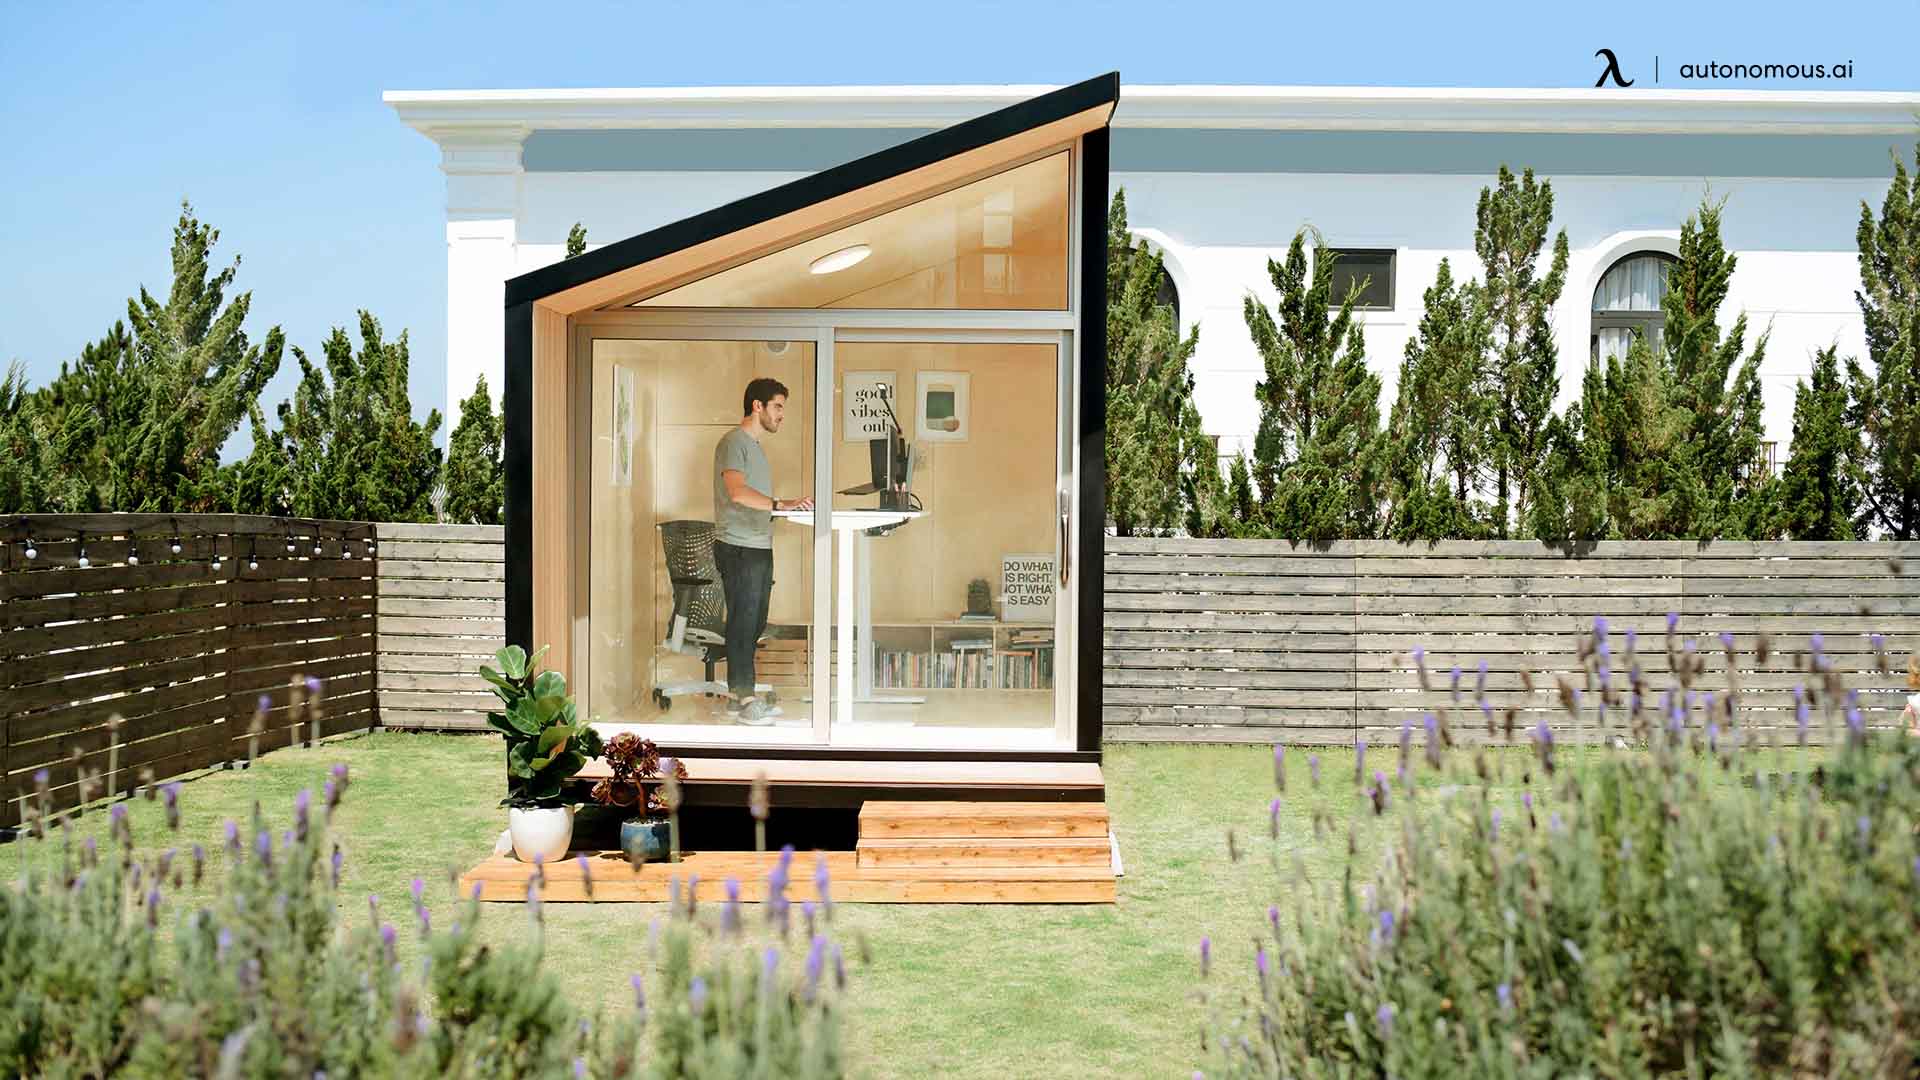 What Is a home office pod in California?